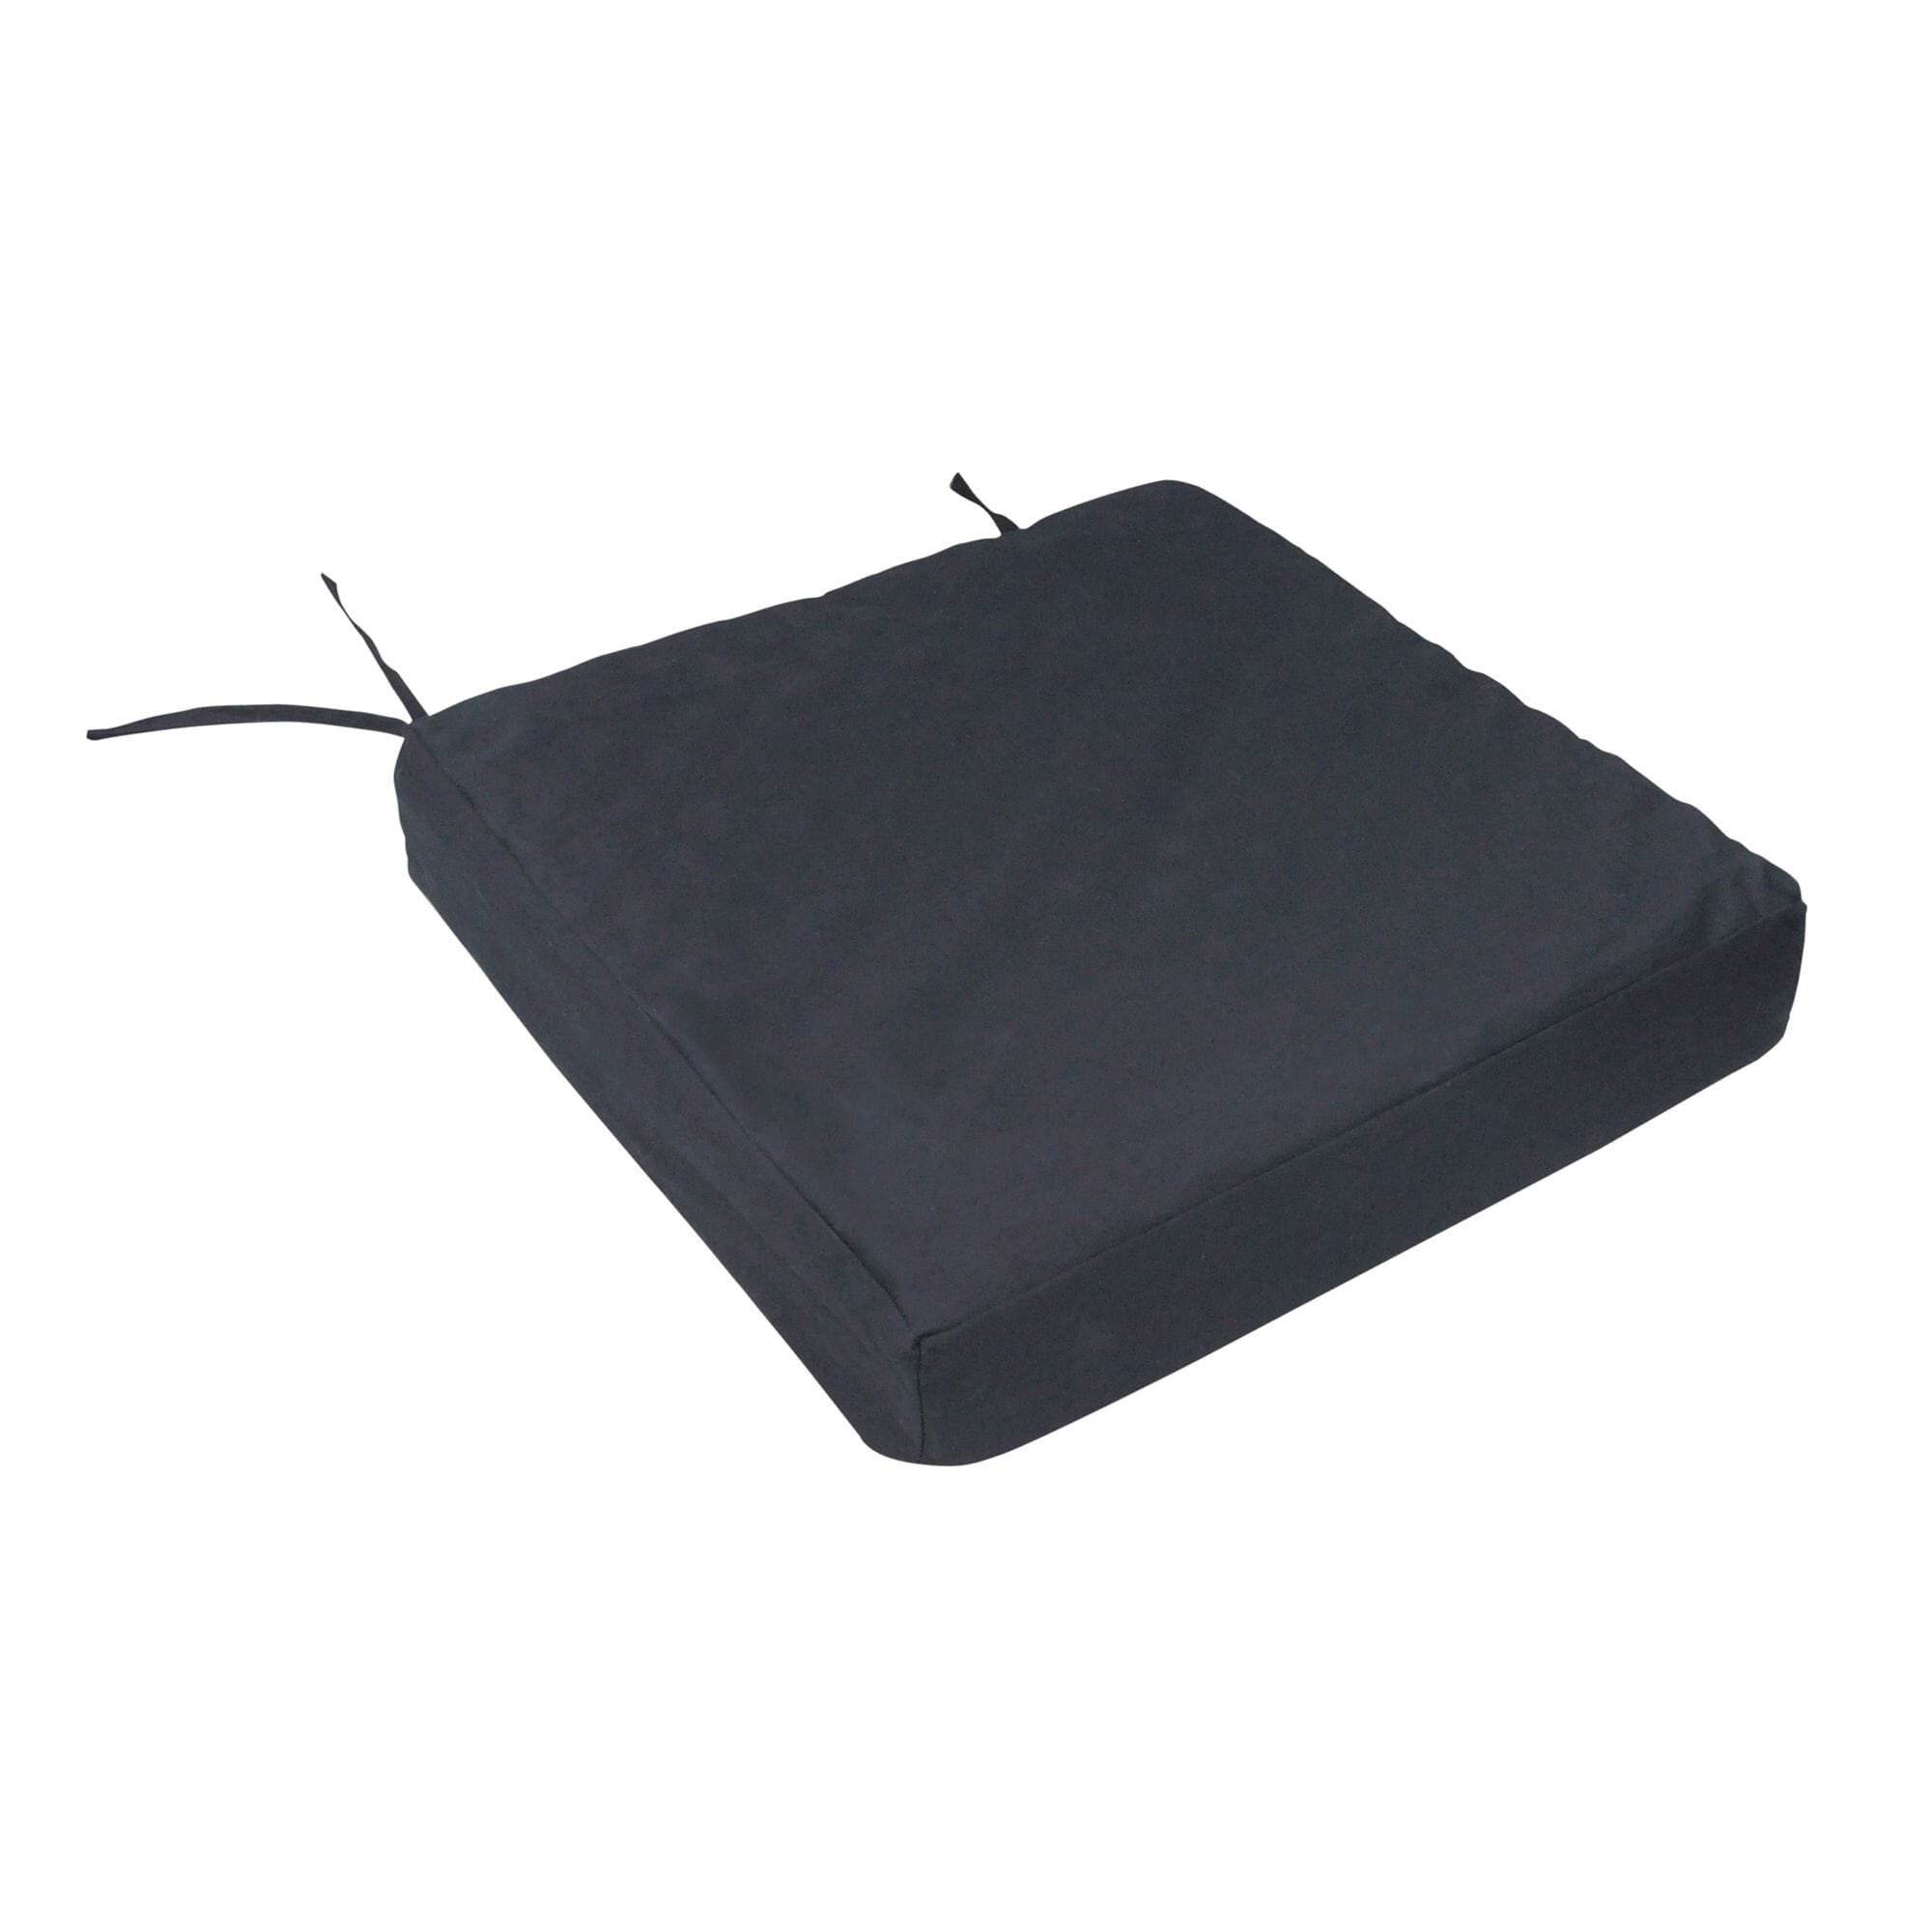 View Deluxe Pressure Relief Orthopaedic Cushion information